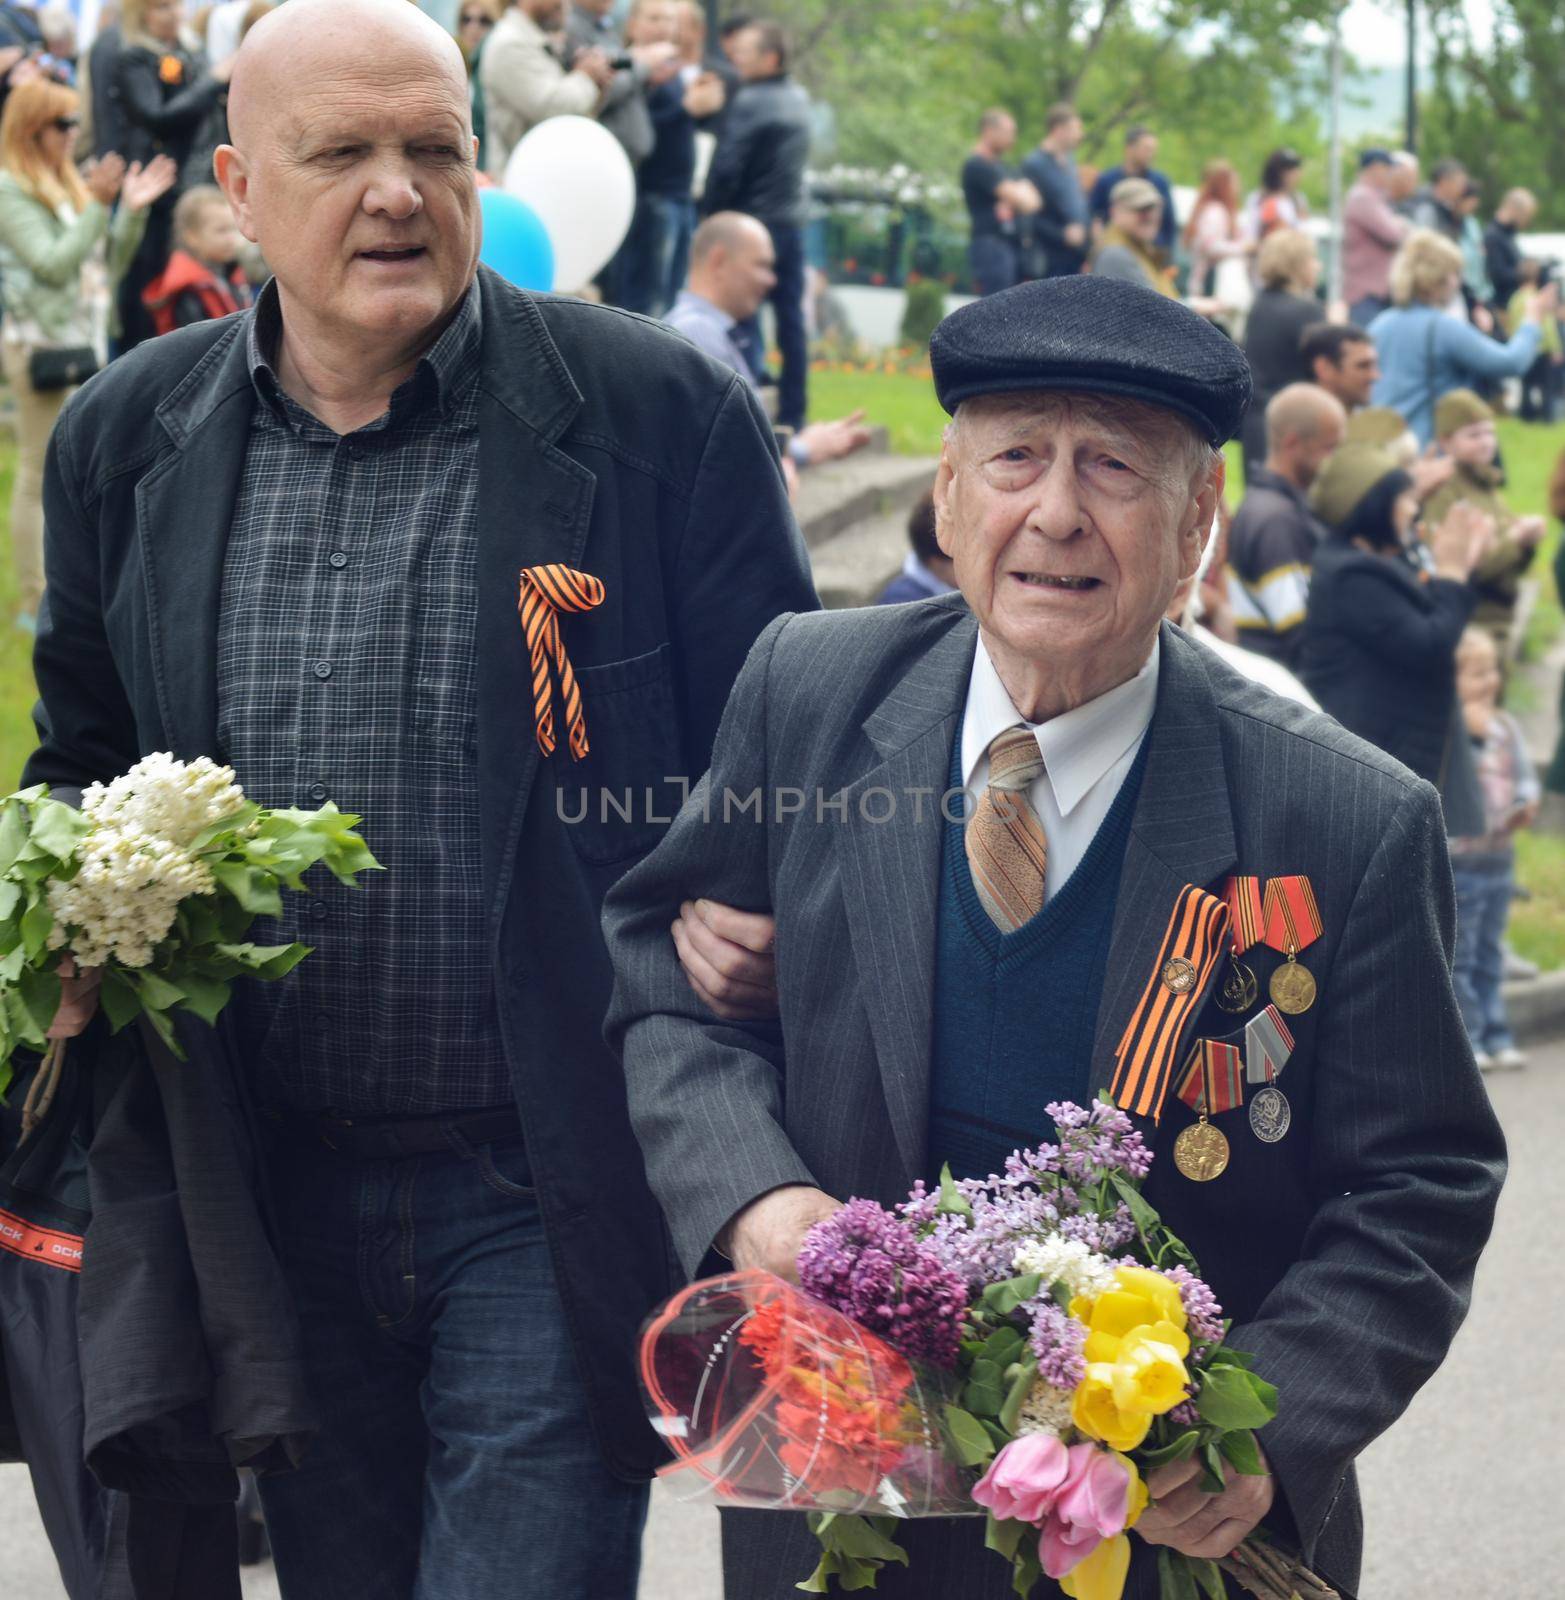 PYATIGORSK, RUSSIA - MAY 09, 2017: The son supports the elderly father on Victory Day by Godi